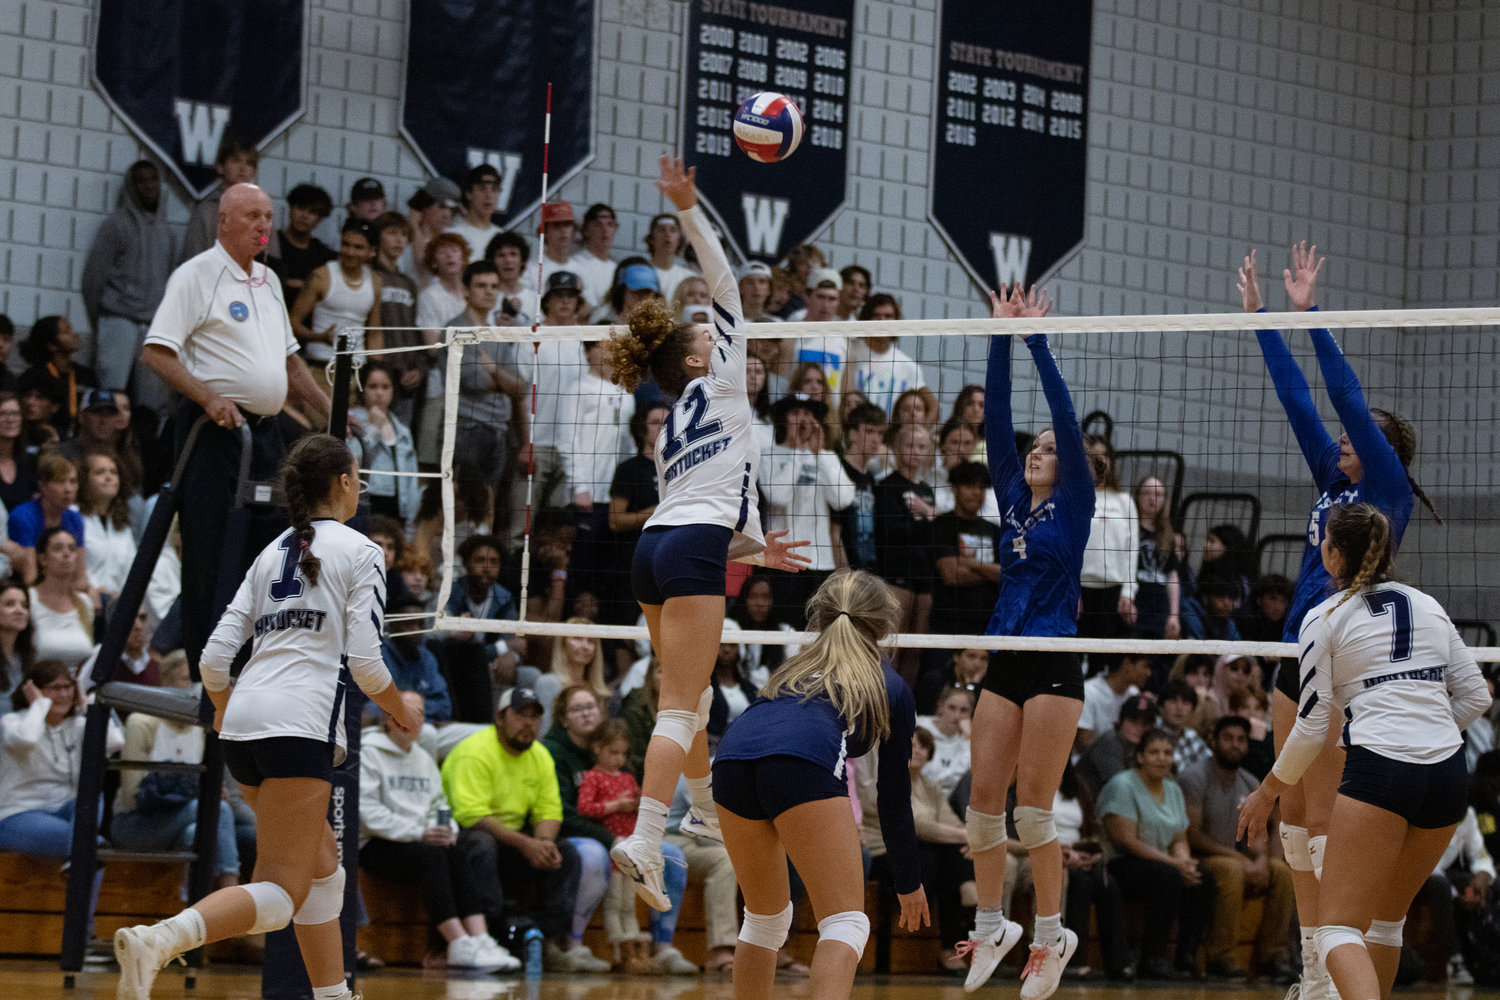 Chloe Marrero goes up for the kill during the Whalers' 3-1 win over Assabet Valley.